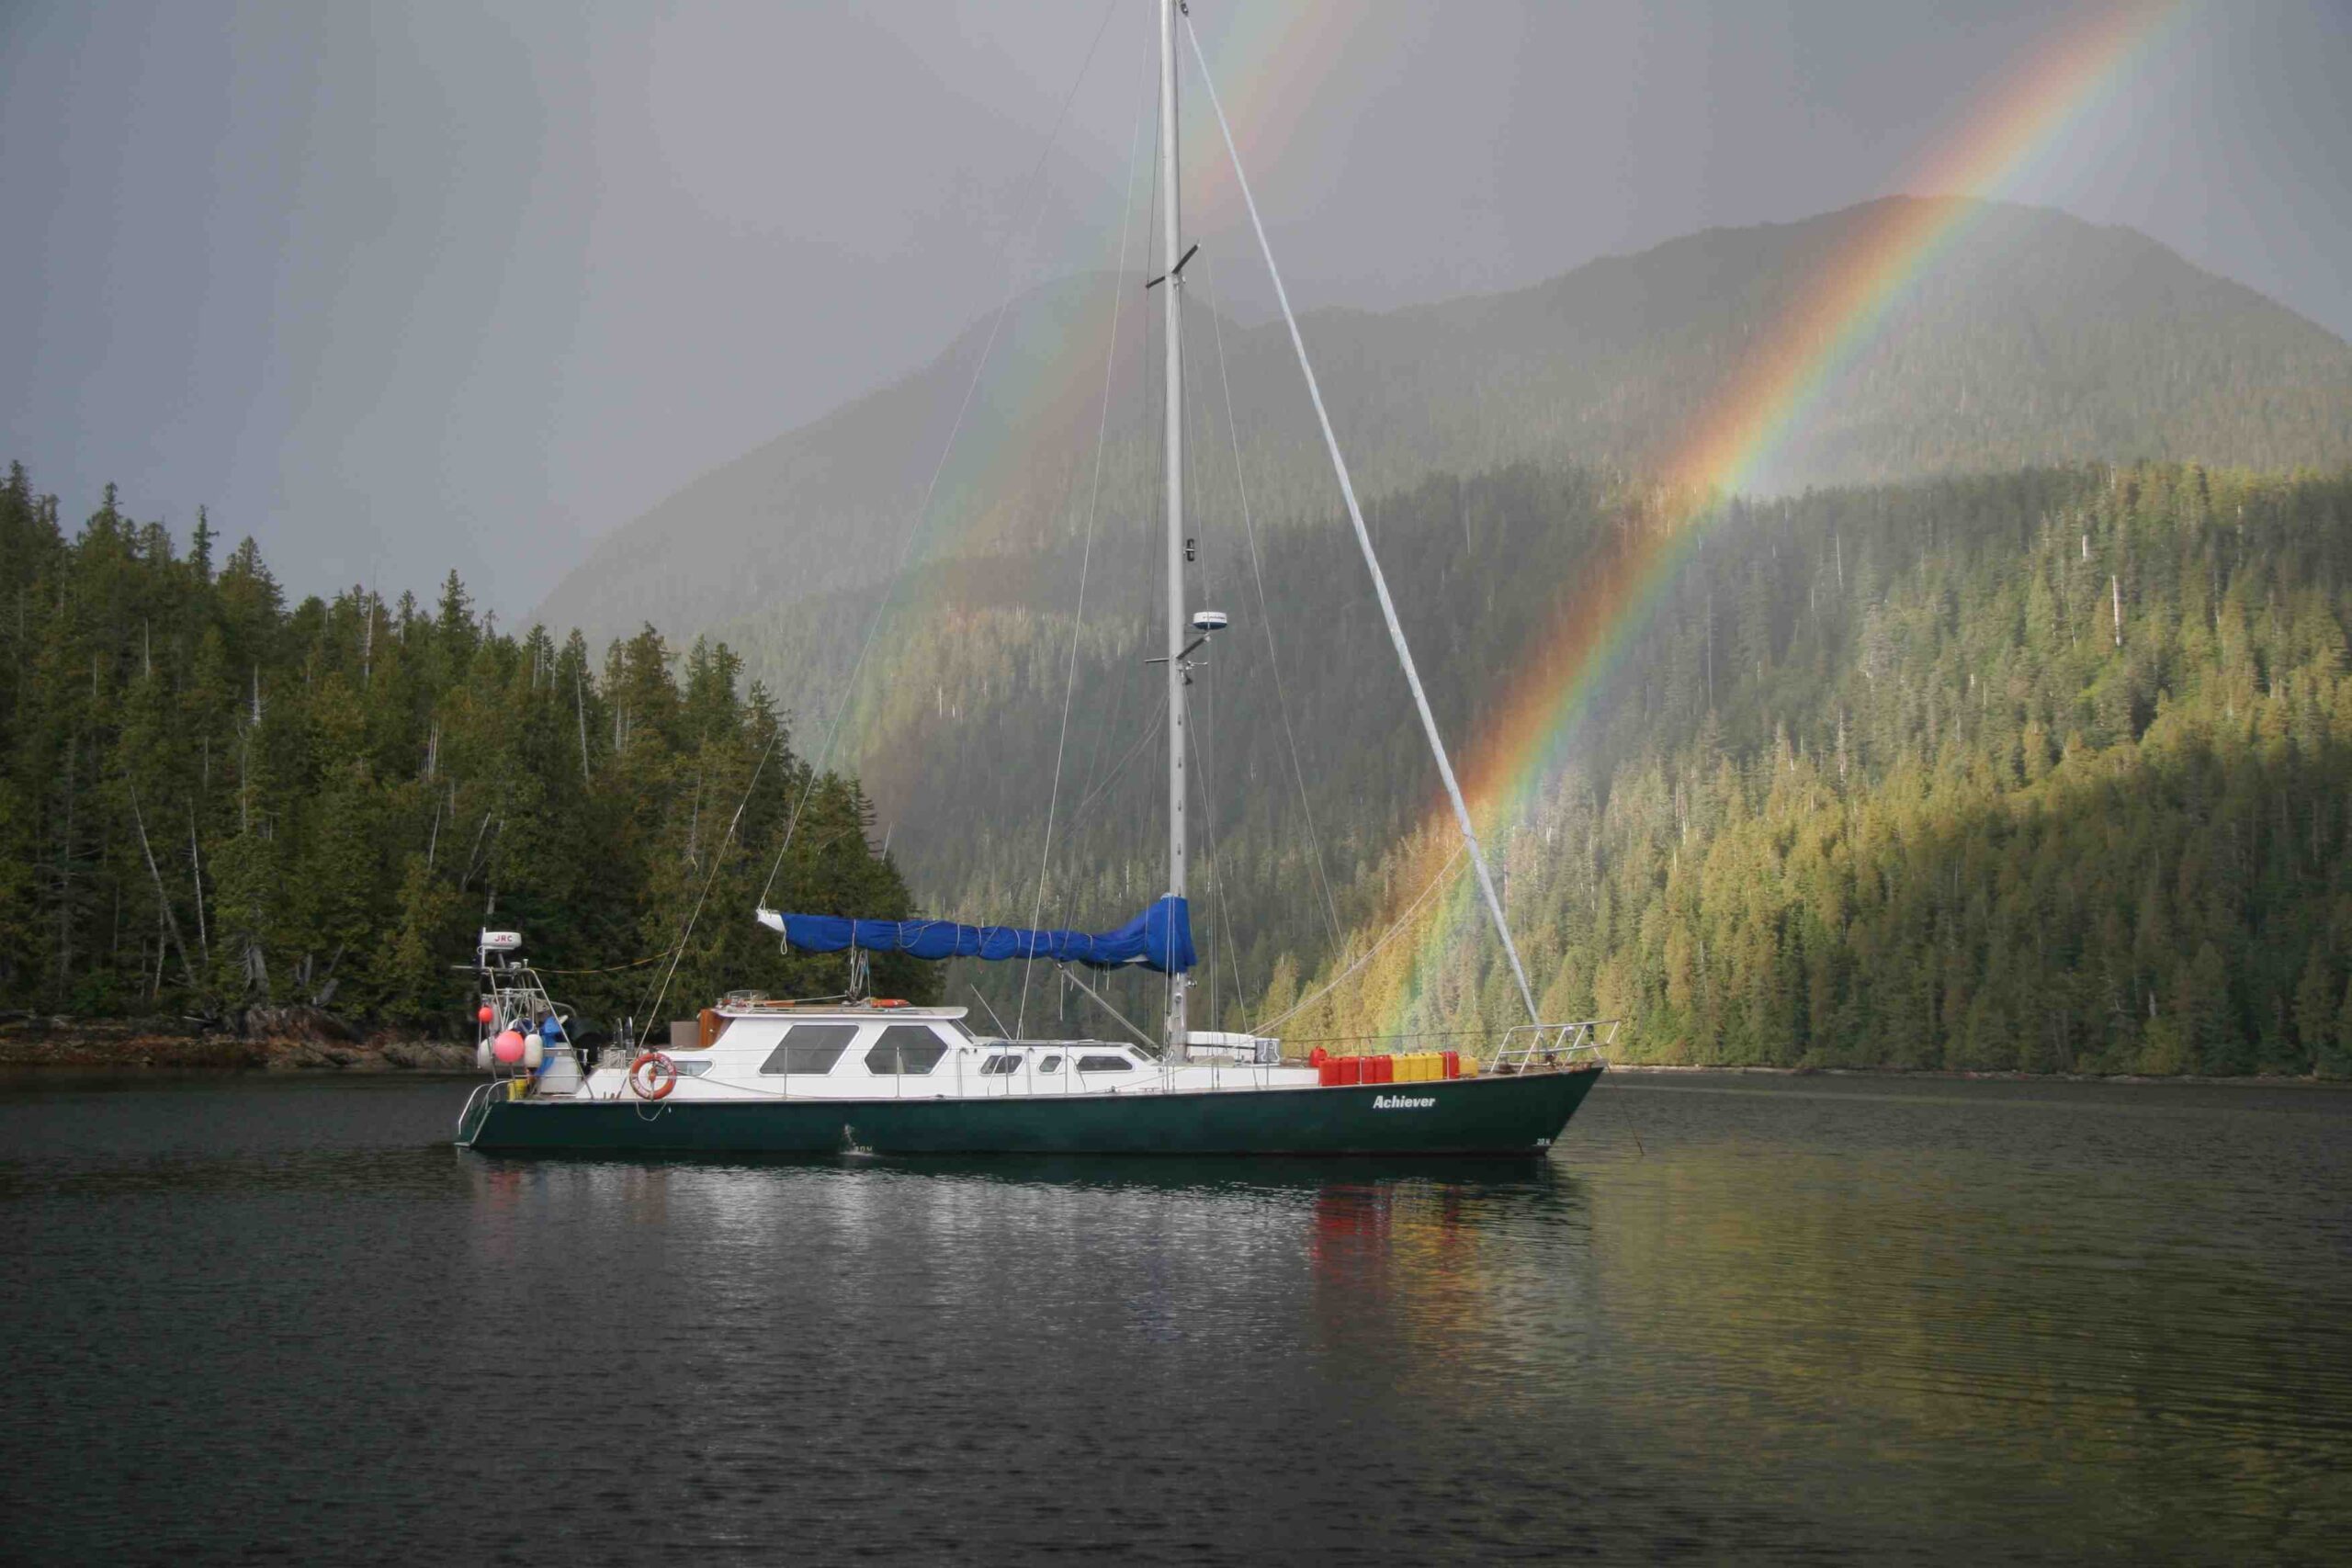 The Achiever, a 60-foot sailing vessel, sits on the water, while forested hills rise in the background. From the water, a double rainbow rises - the brighter rainbow seems to come from the bow of the boat.